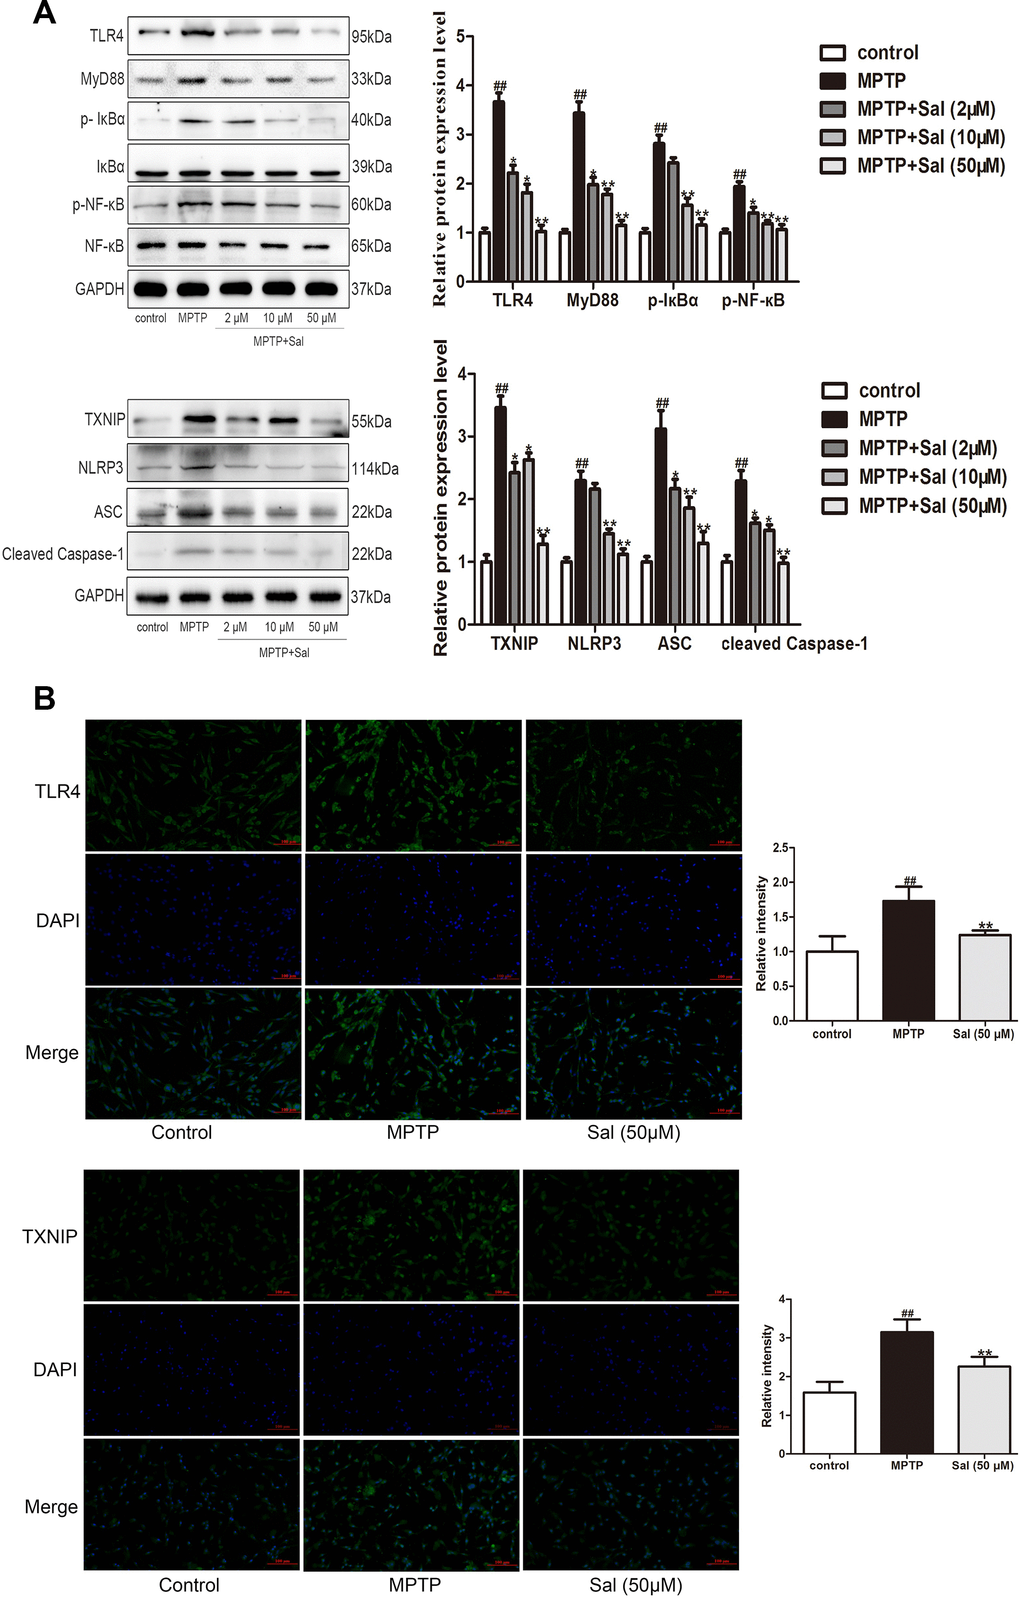 Sal prevented PC-12 cells pyroptosis through inhibiting the TLR4/MyD88/NF-κB and NLRP3/ASC/Caspase-1 signaling pathways. (A) Sal inhibited MPTP-induced PC-12 cells pyroptosis through TLR4/MyD88/NF-кB and TXNIP/NLRP3/Caspase-1 signaling pathways. Cells were incubated with Sal (2, 10, 50 μM) for 2 h, followed by stimulation with MPTP (500 μM) for 24 h. The protein expressions of TLR4, MyD88, p-IкBα, p-NF-кB, TXNIP, NLRP3, ASC and cleaved Caspase-1 in MPTP-induced PC-12 cells were determined by western blot. (B) Sal inhibited MPTP-induced increase of TLR4 and TXNIP by immunofluorescence. Original magnification: x200. All data are represented as mean ± SD. # P ## P 